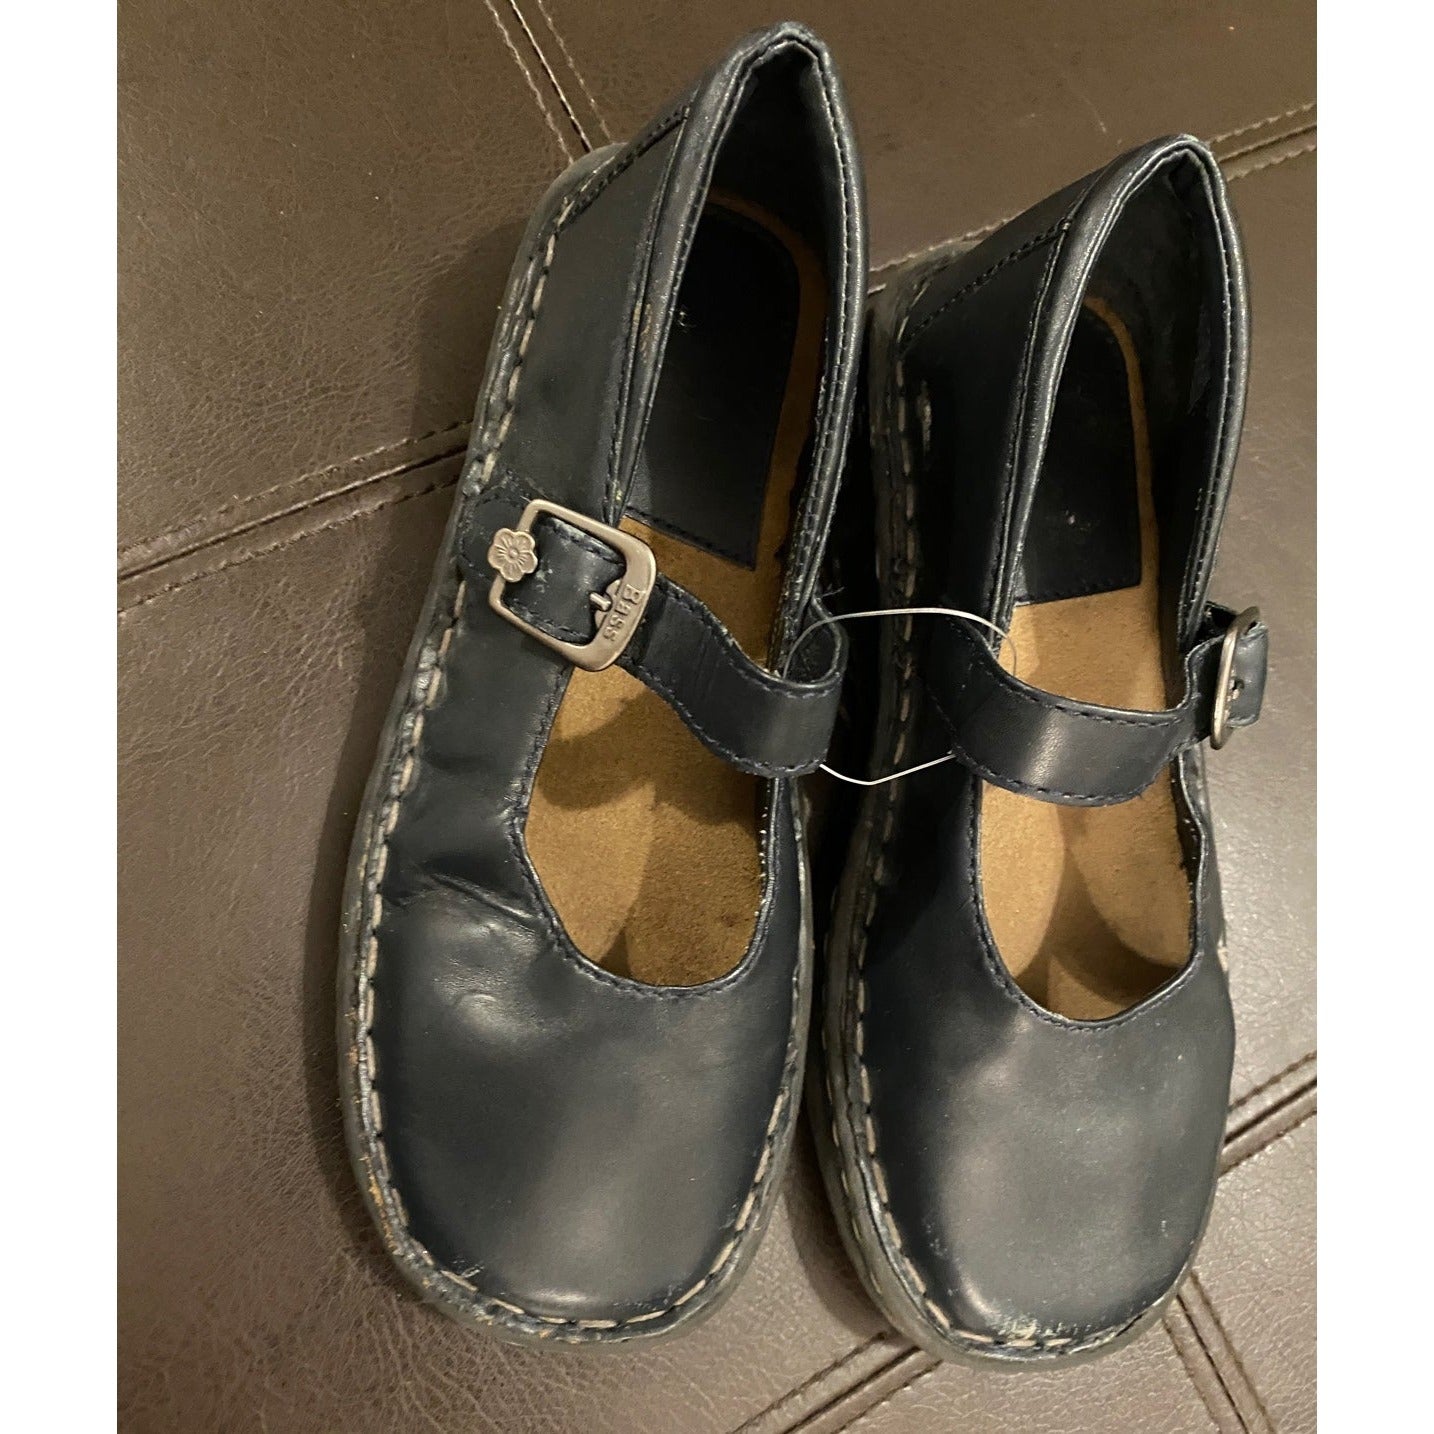 Girls 12.5 Navy Bass leather Mary Janes shoes